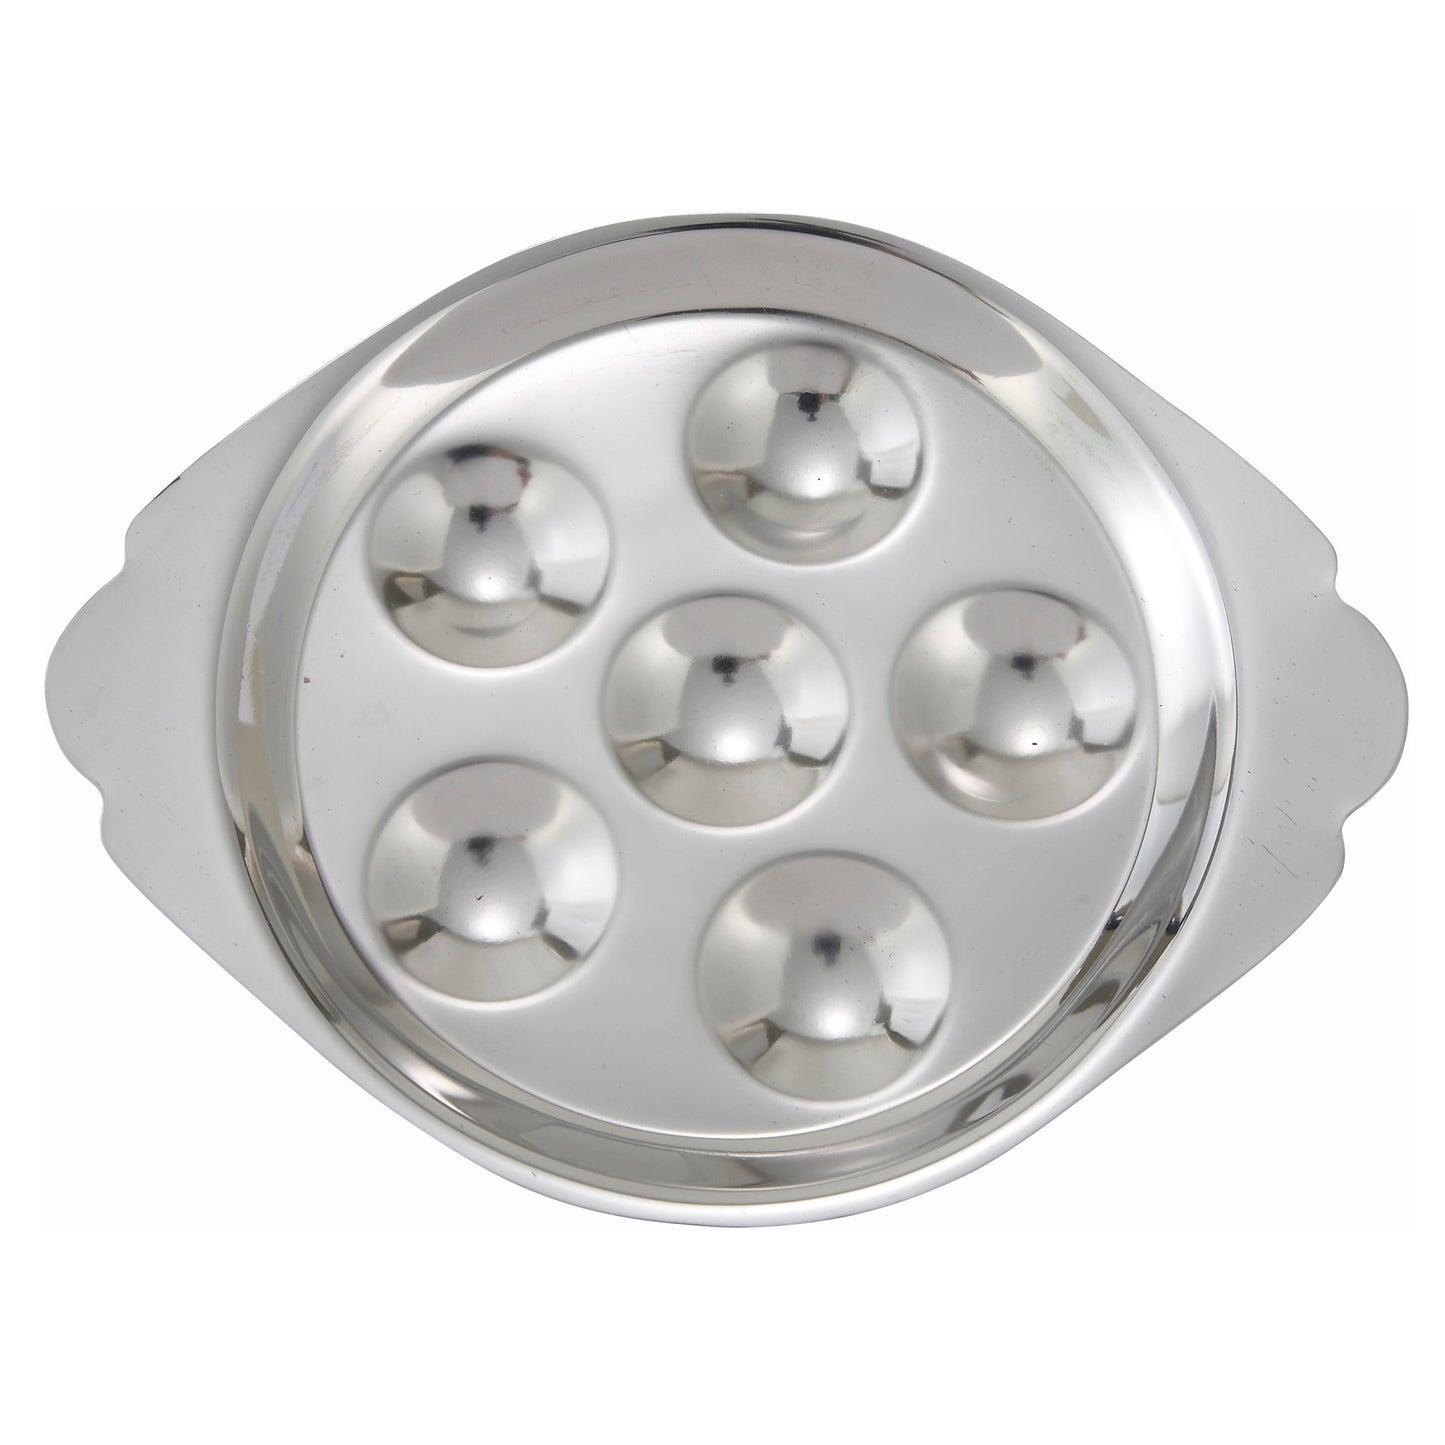 SND-6 - Snail Dish, Stainless Steel